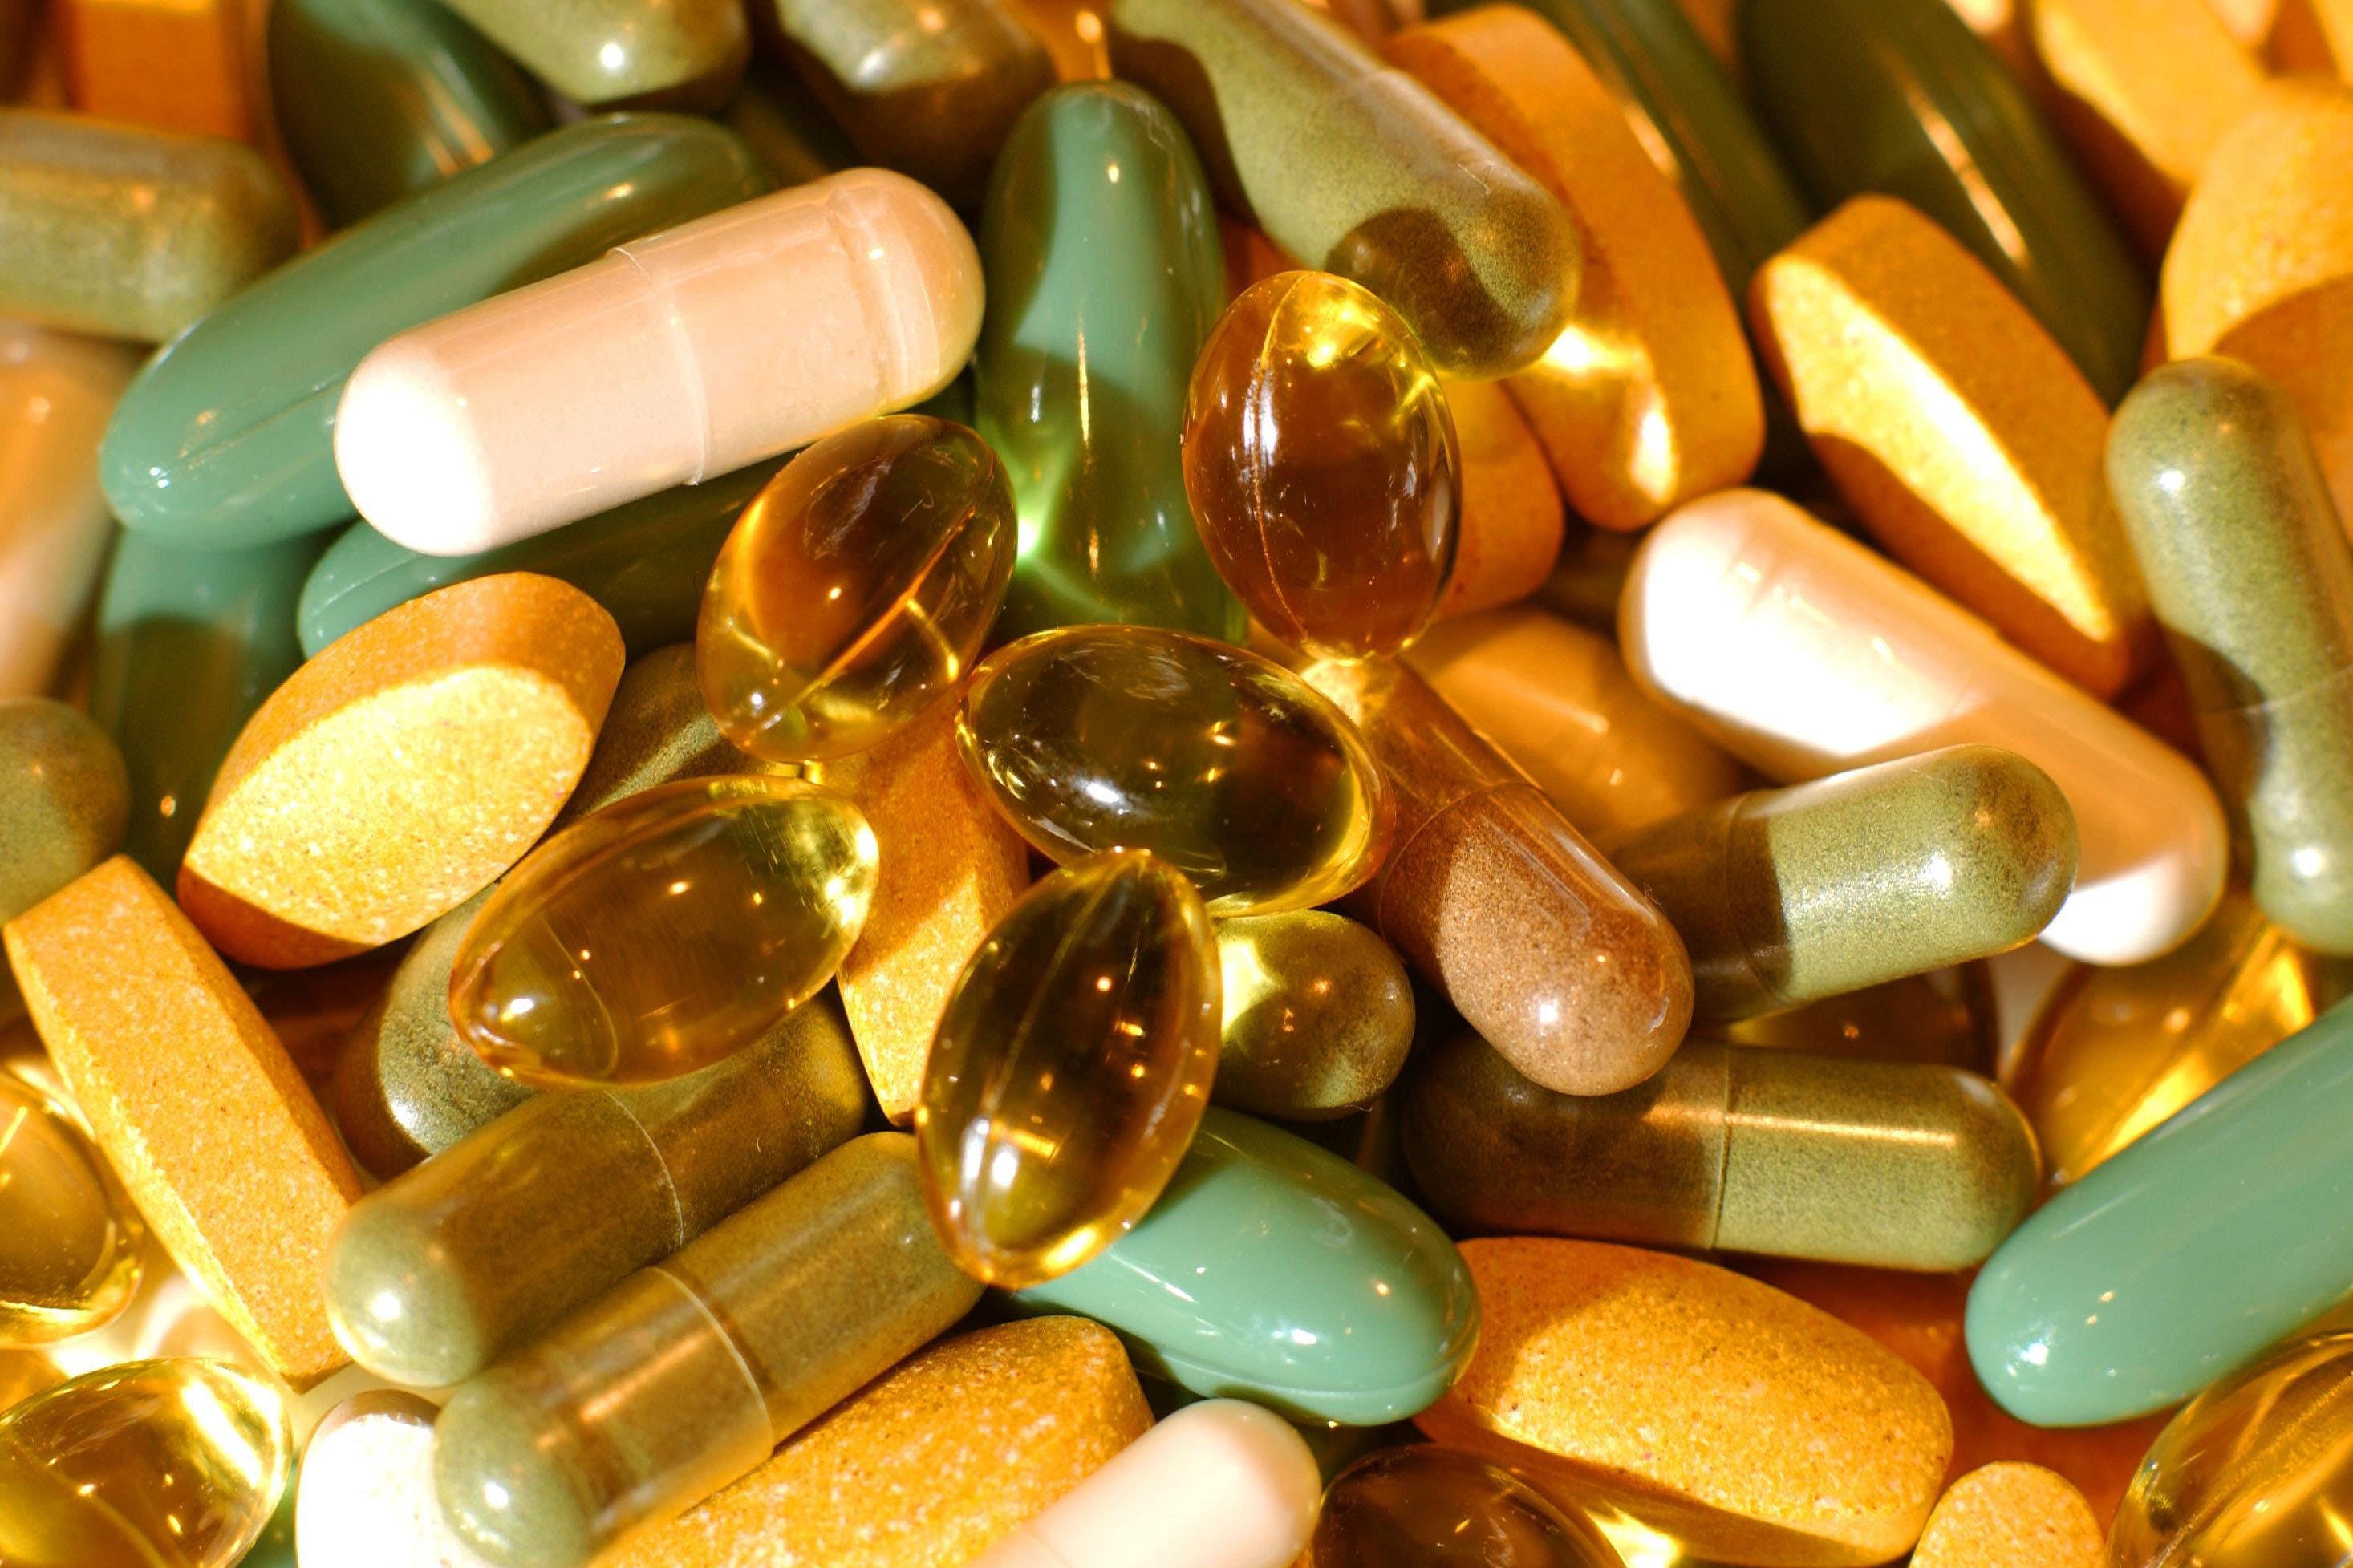 Daily multivitamin may help slow memory loss in older adults – study | The Independent